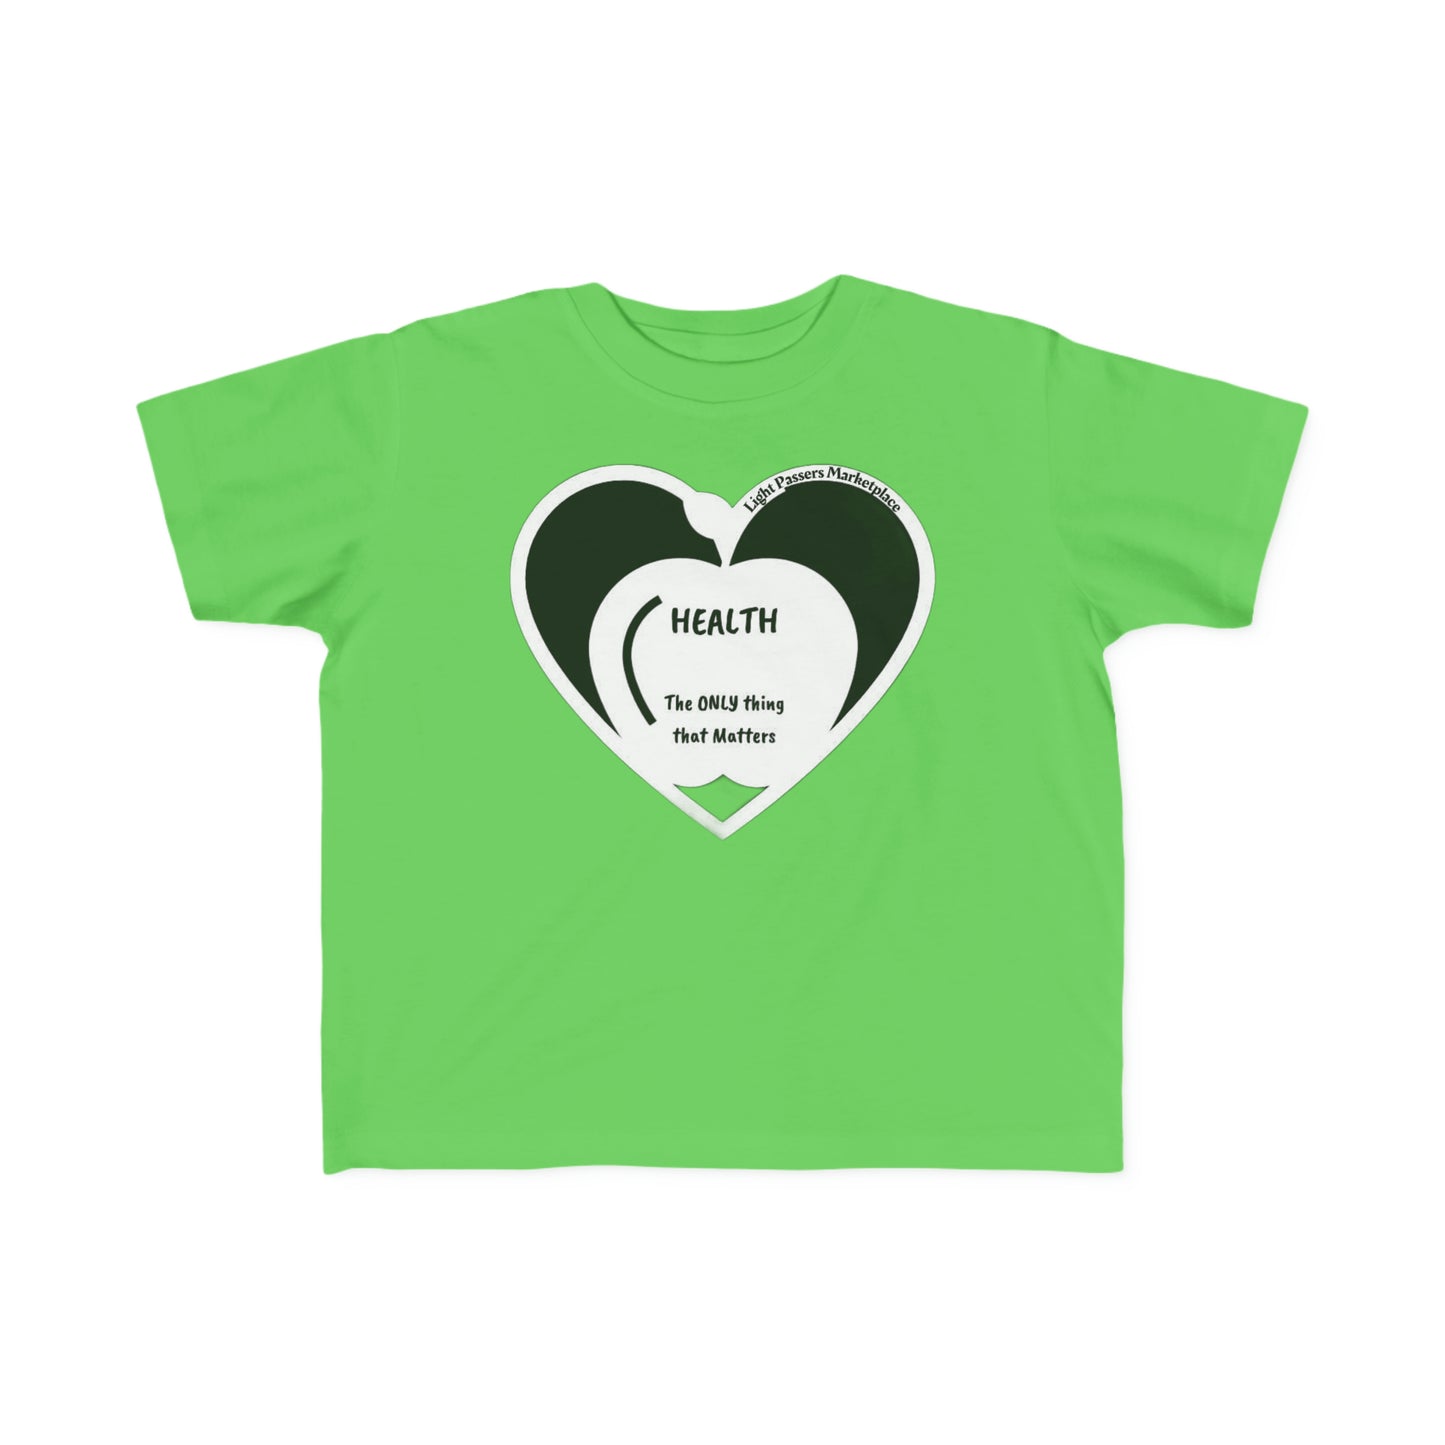 A green toddler tee with a heart and text design, made of soft 100% combed cotton. Durable print, light fabric, tear-away label, classic fit. Apple Health Toddler T-shirts for sensitive skin.